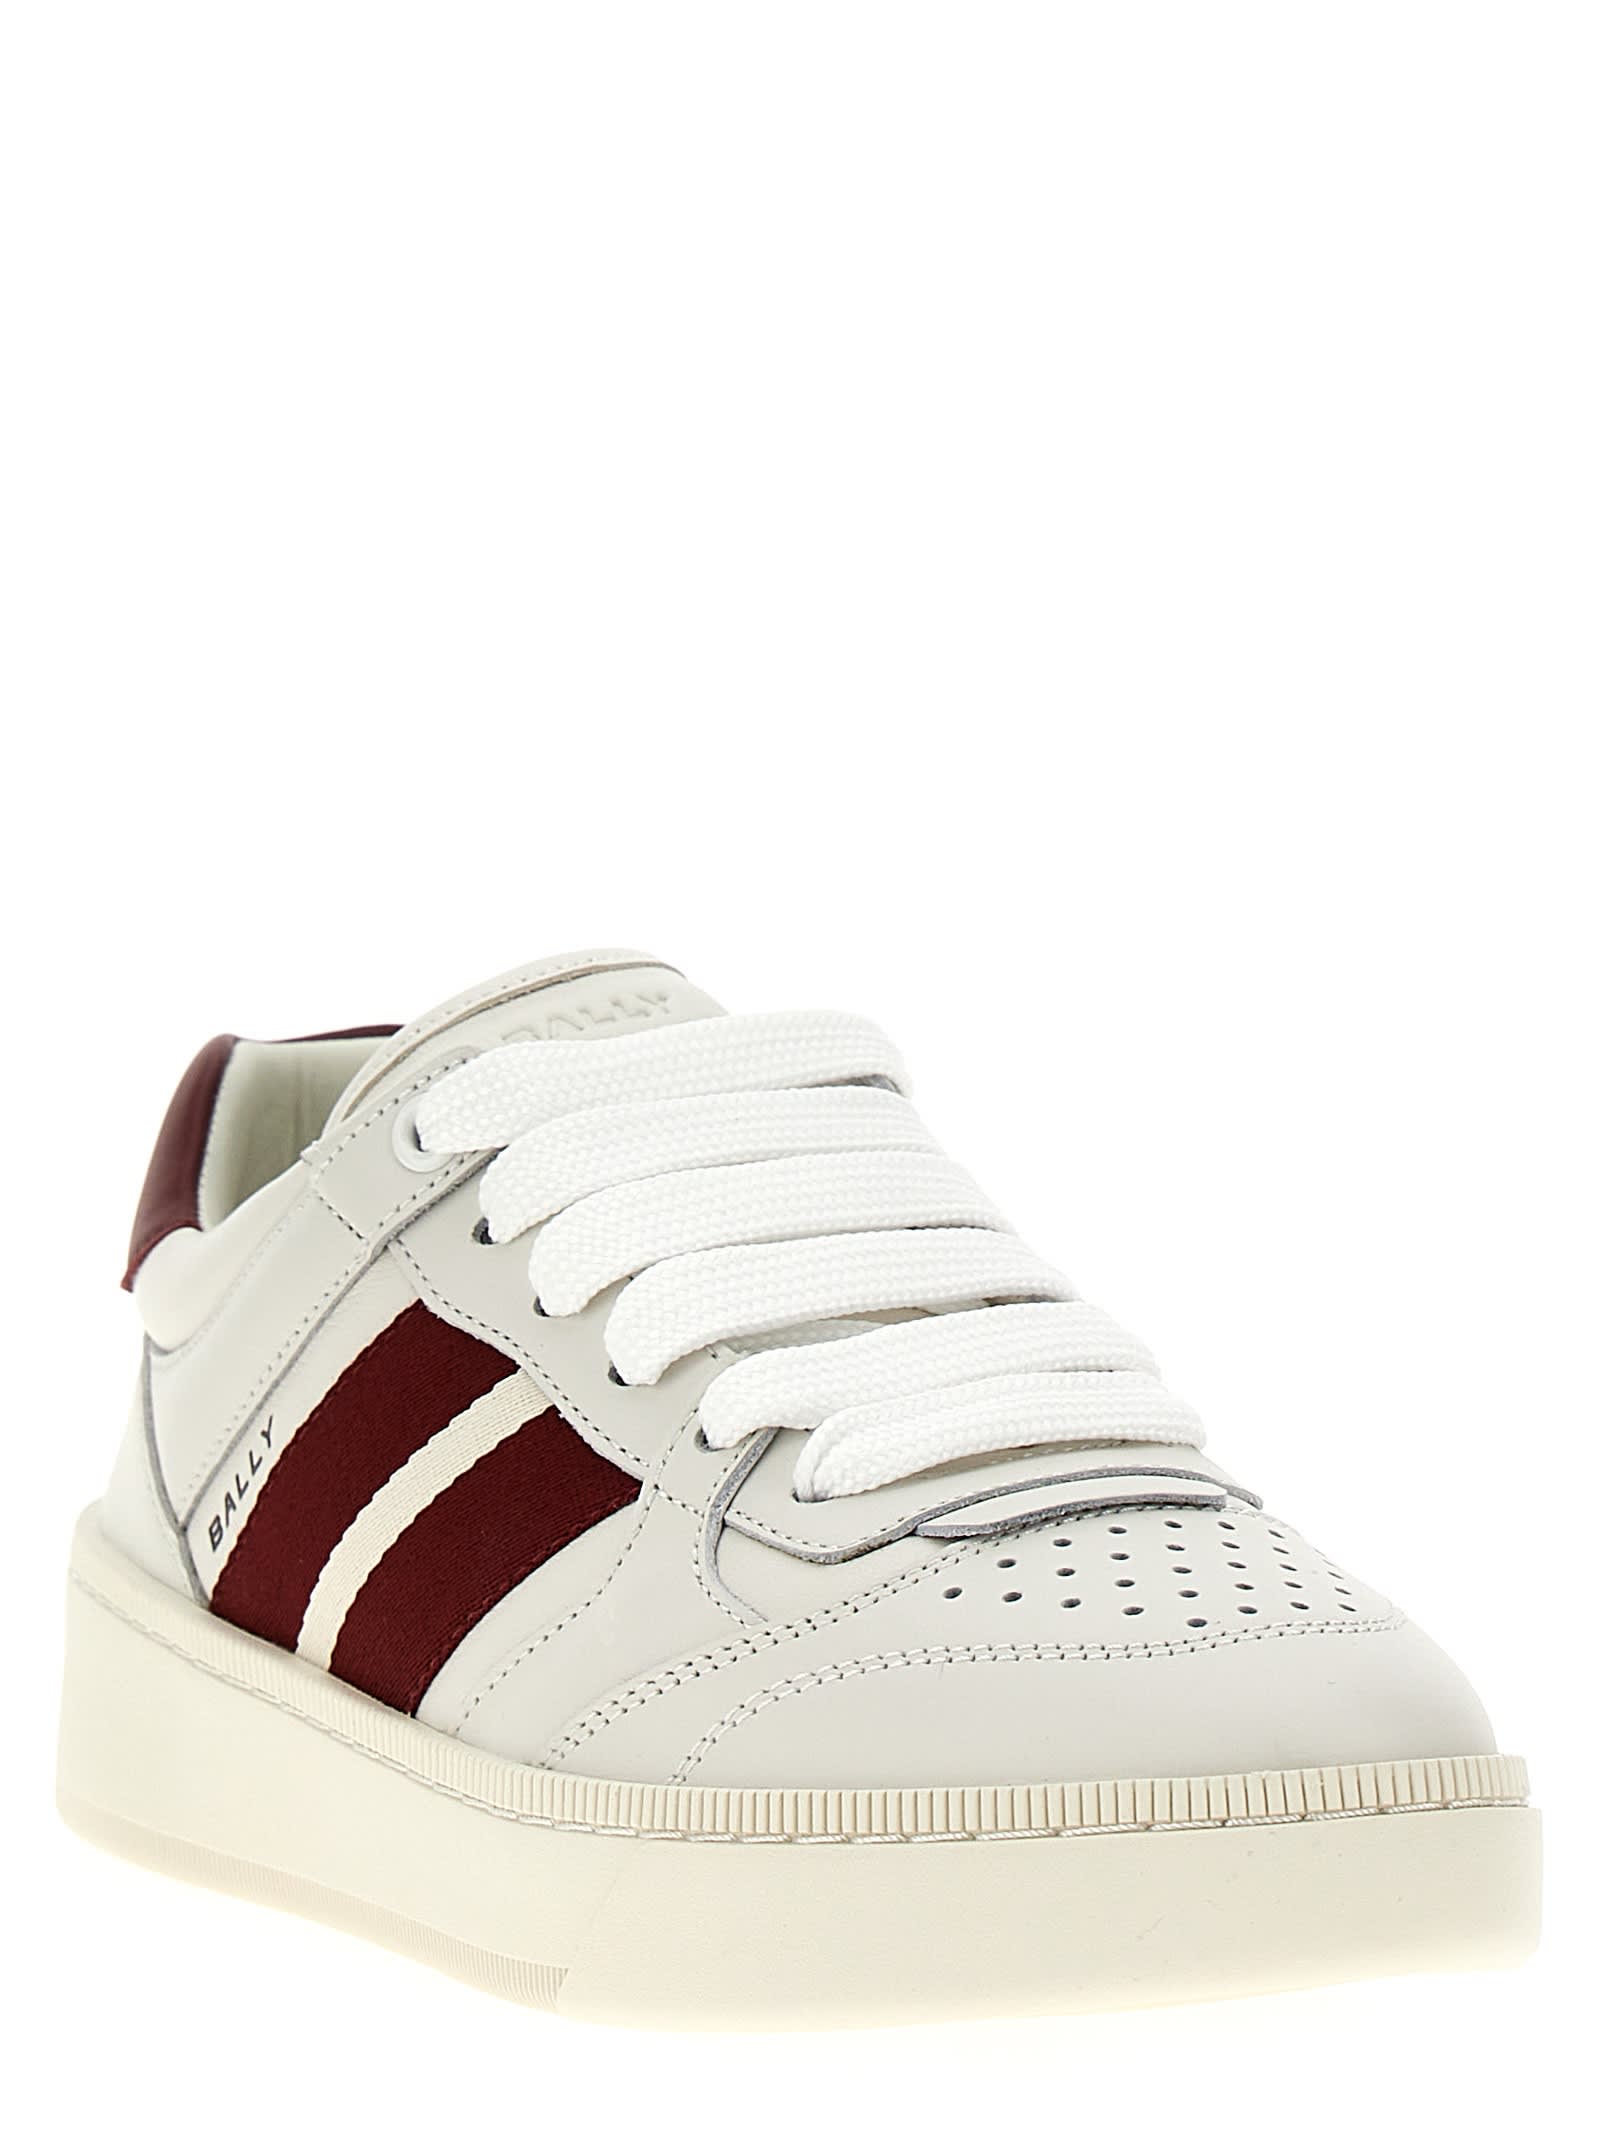 Shop Bally Rebby Sneakers In Red